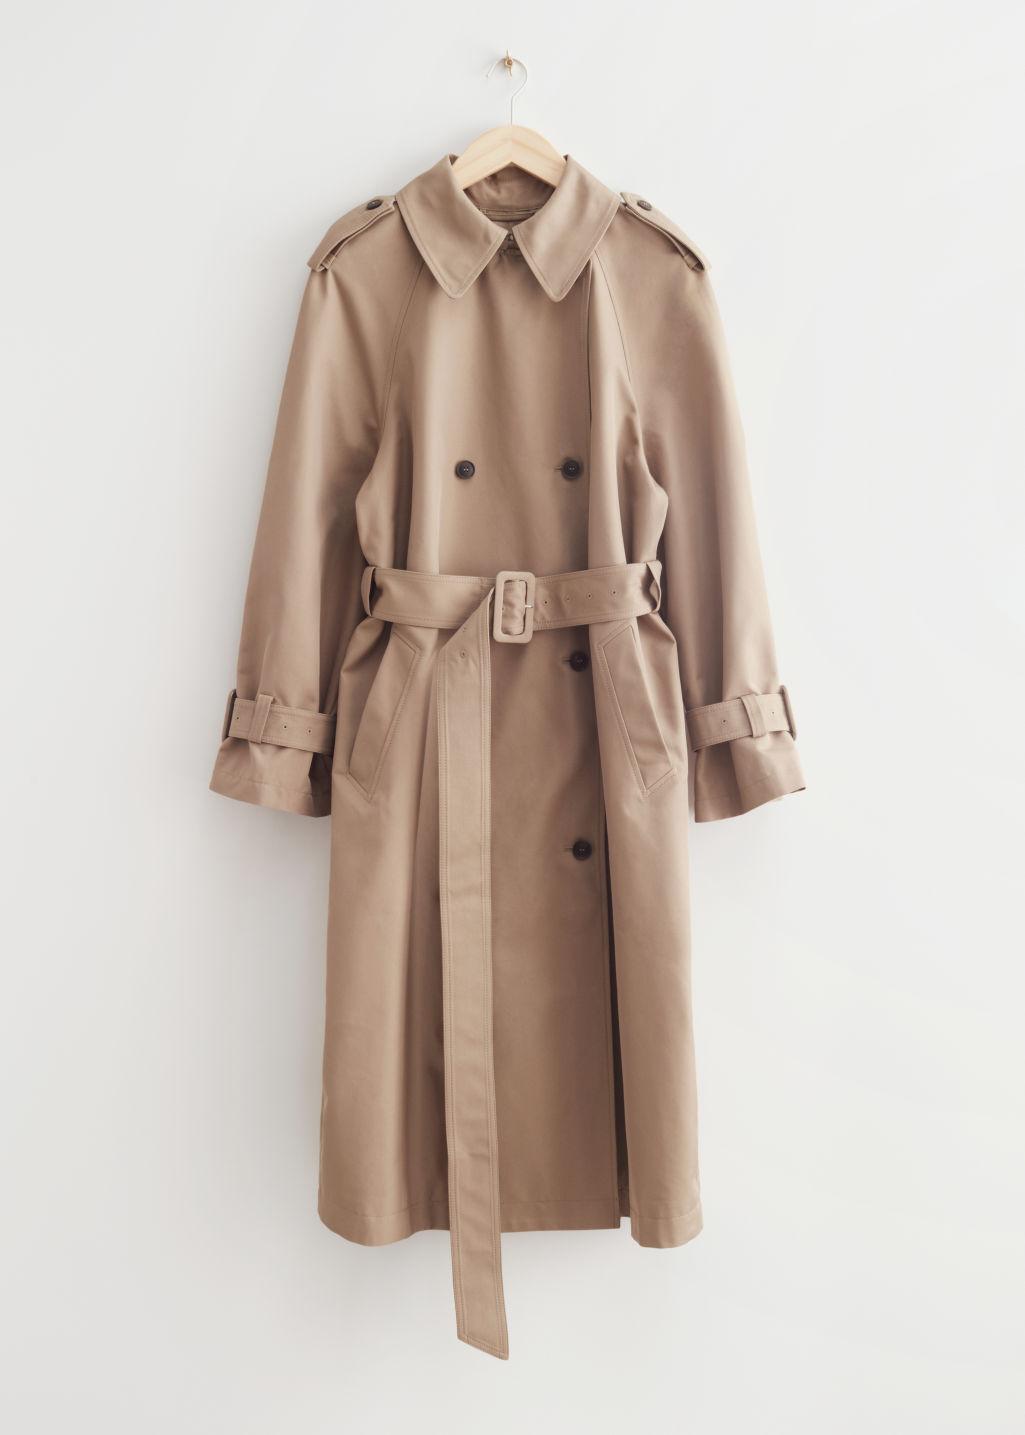 Spring Things | On our Shopping List: Trench Coats, Scalloped Trays, Wicker Handbags & more